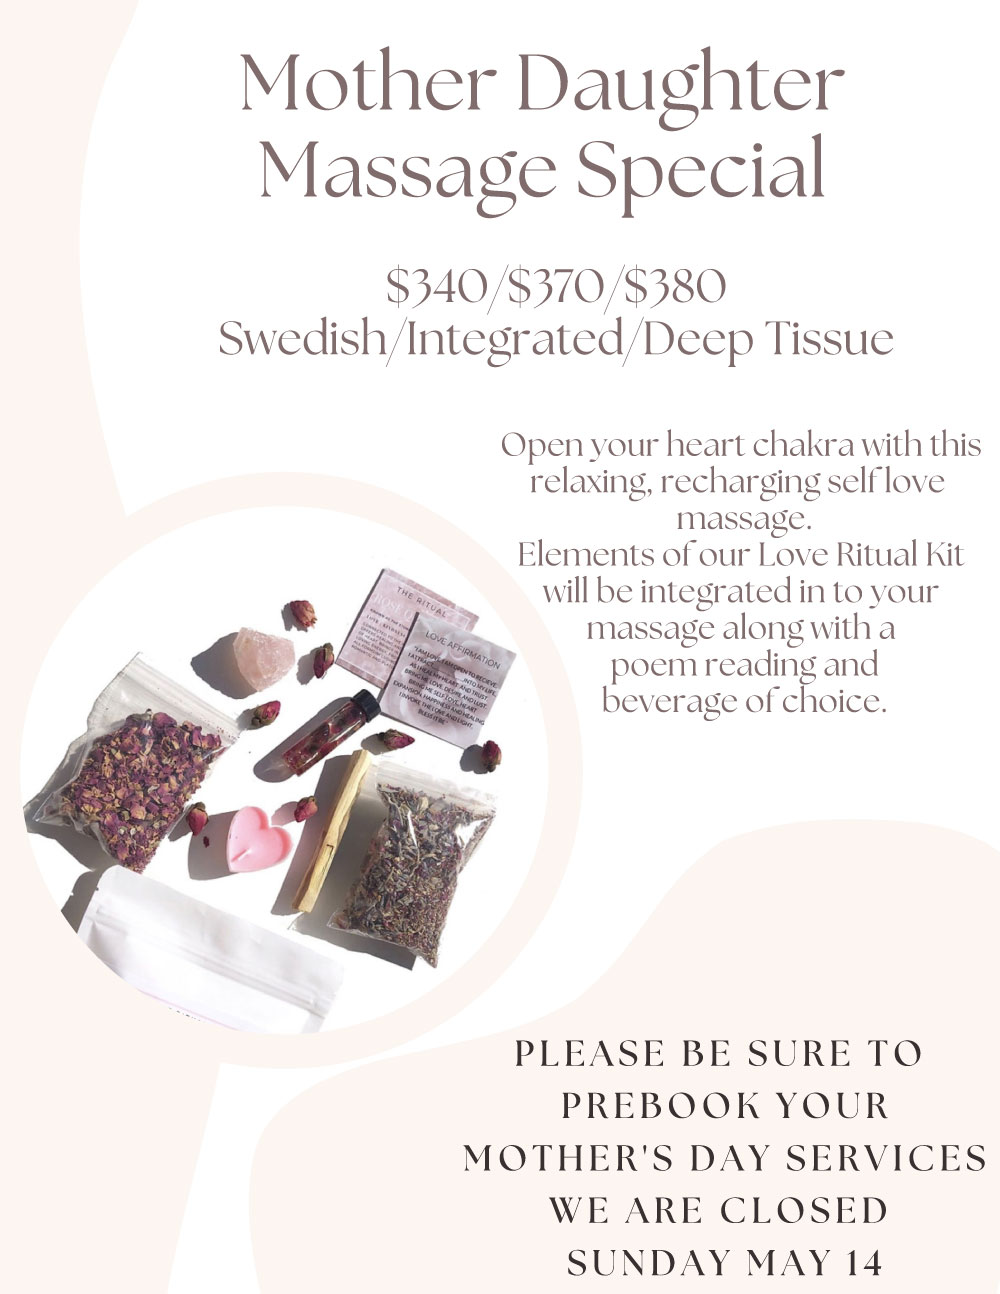 Mother's Day - Mother Daughter Massage Special Paso Robles